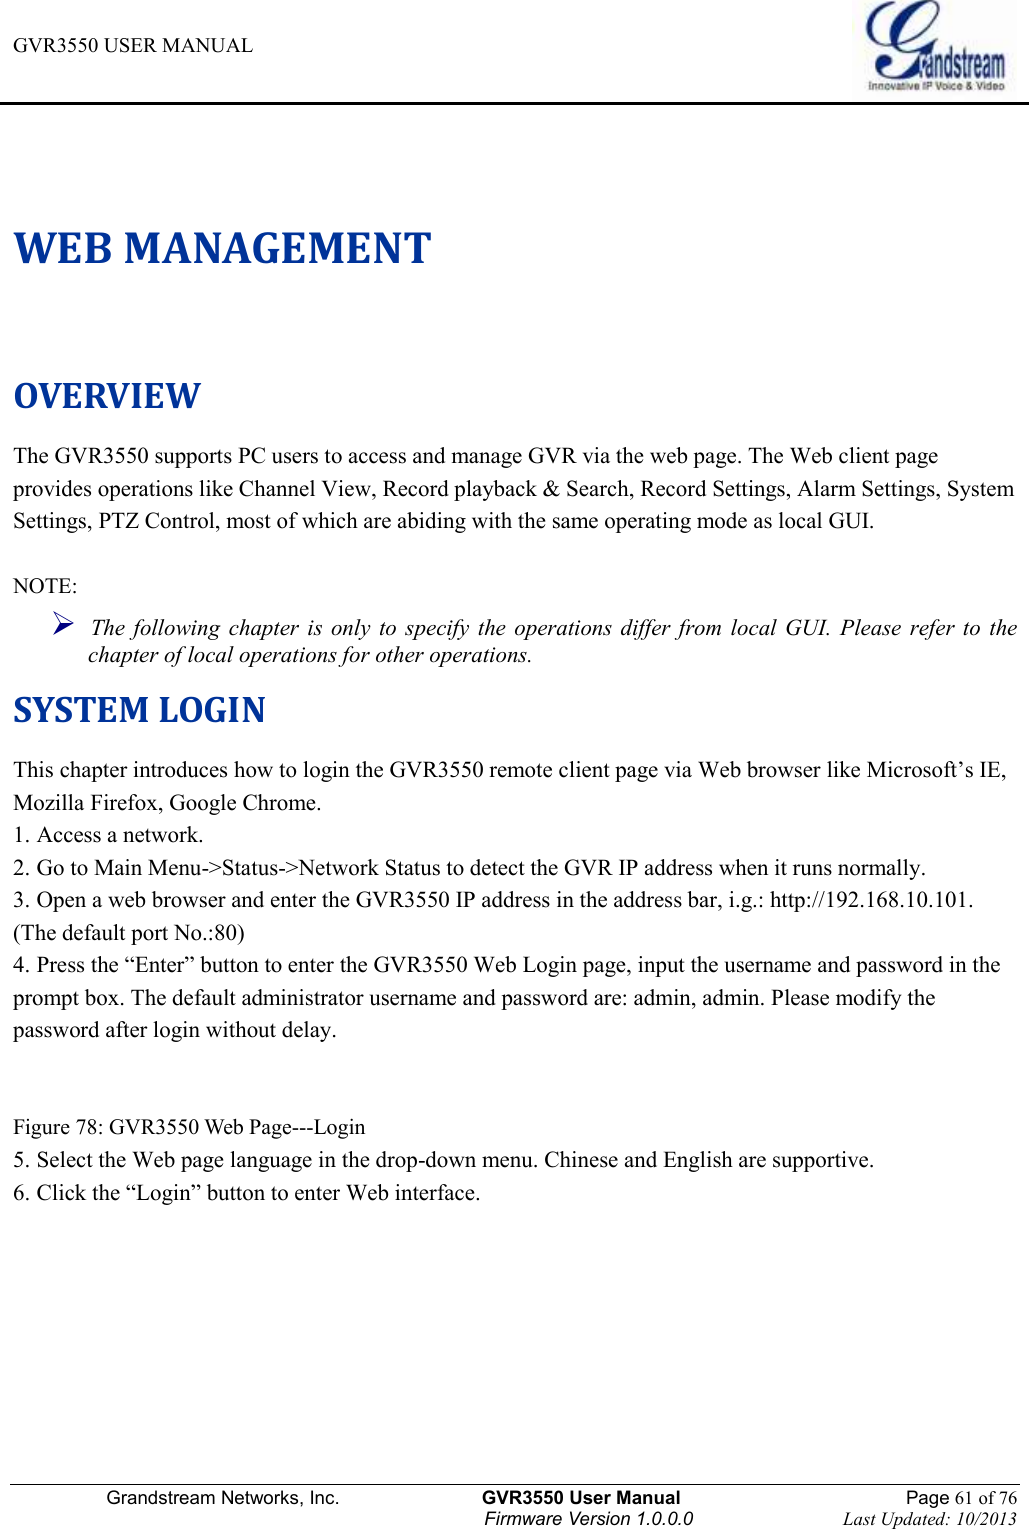 GVR3550 USER MANUAL   Grandstream Networks, Inc.                    GVR3550 User Manual                                                Page 61 of 76 Firmware Version 1.0.0.0                                Last Updated: 10/2013  WEB MANAGEMENT OVERVIEW The GVR3550 supports PC users to access and manage GVR via the web page. The Web client page provides operations like Channel View, Record playback &amp; Search, Record Settings, Alarm Settings, System Settings, PTZ Control, most of which are abiding with the same operating mode as local GUI.    NOTE:    The  following  chapter is  only  to  specify  the  operations differ from  local  GUI.  Please  refer  to  the chapter of local operations for other operations.   SYSTEM LOGIN This chapter introduces how to login the GVR3550 remote client page via Web browser like Microsoft’s IE, Mozilla Firefox, Google Chrome. 1. Access a network. 2. Go to Main Menu-&gt;Status-&gt;Network Status to detect the GVR IP address when it runs normally. 3. Open a web browser and enter the GVR3550 IP address in the address bar, i.g.: http://192.168.10.101. (The default port No.:80)   4. Press the “Enter” button to enter the GVR3550 Web Login page, input the username and password in the prompt box. The default administrator username and password are: admin, admin. Please modify the password after login without delay.   Figure 78: GVR3550 Web Page---Login   5. Select the Web page language in the drop-down menu. Chinese and English are supportive. 6. Click the “Login” button to enter Web interface.    